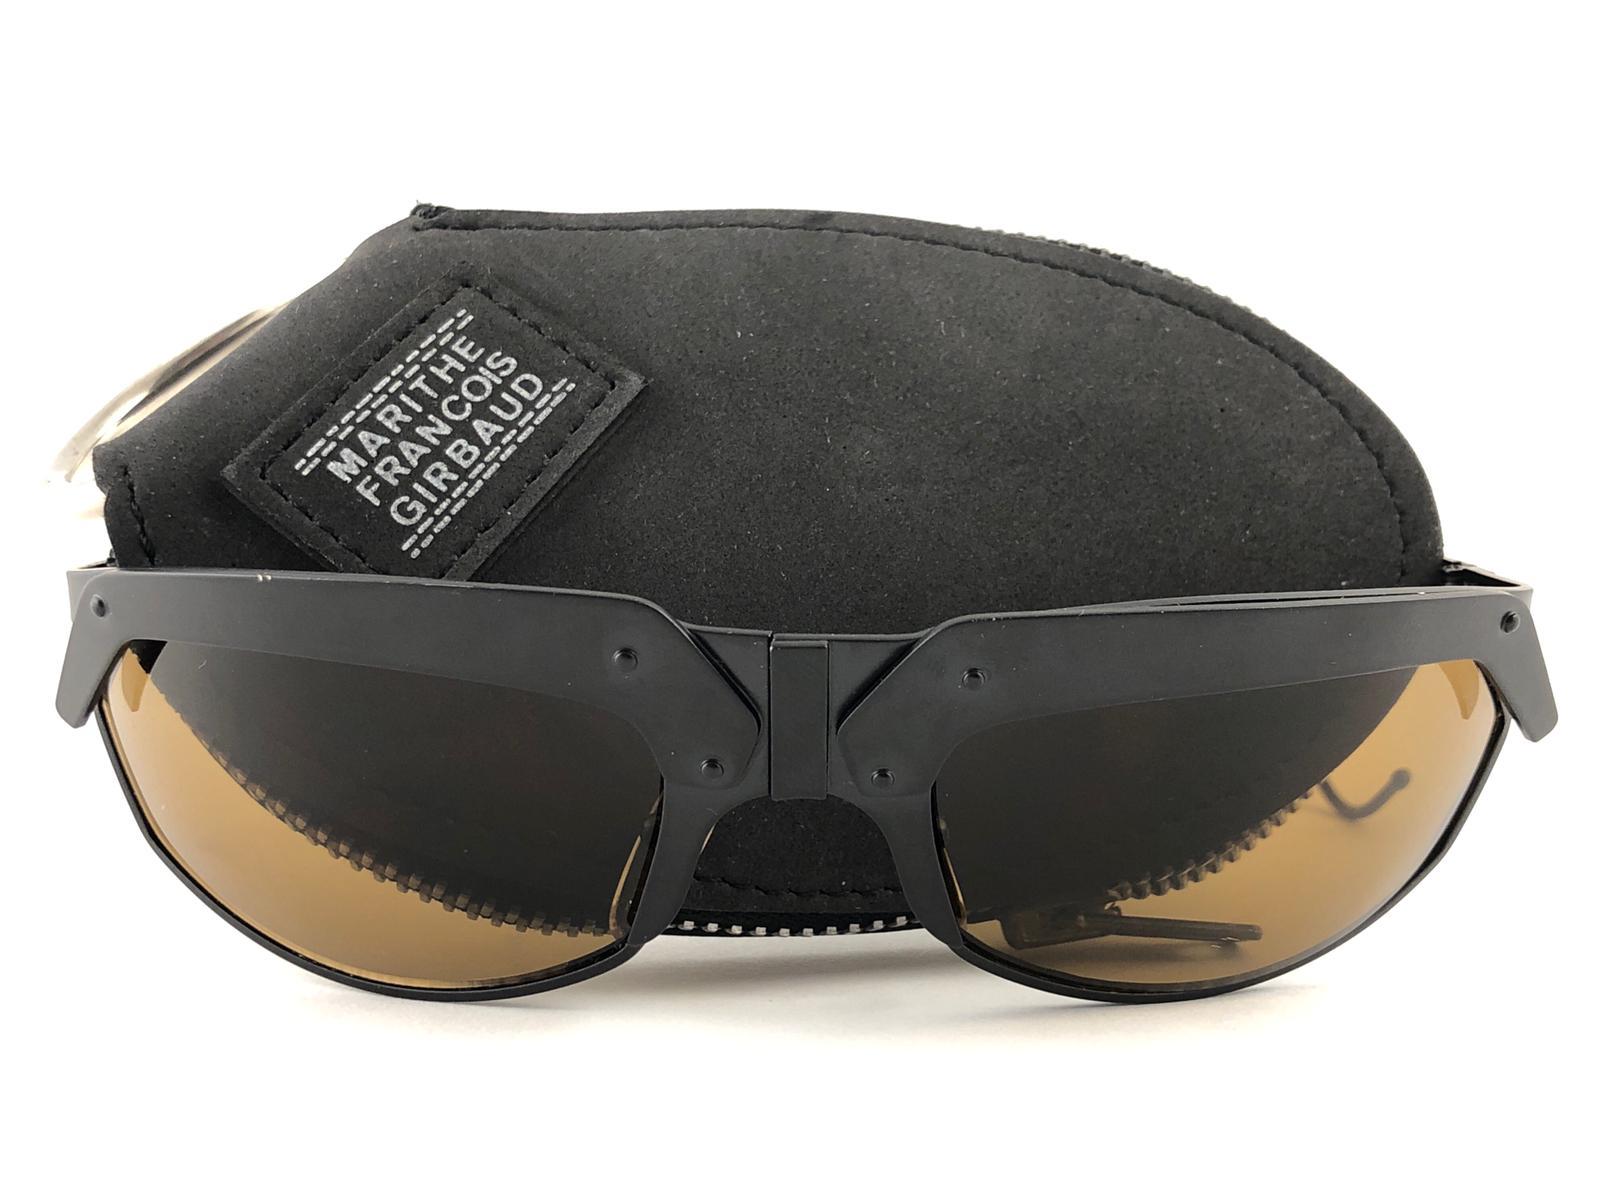 

Precious limited edition IDC G2 Pour Marithe Francois Girbaud Black mate sunglasses holding a spotless pair of brown lenses. Curled temples for a fashionable yet comfortable wear.

New, never worn or displayed. This pair could show minor sign of